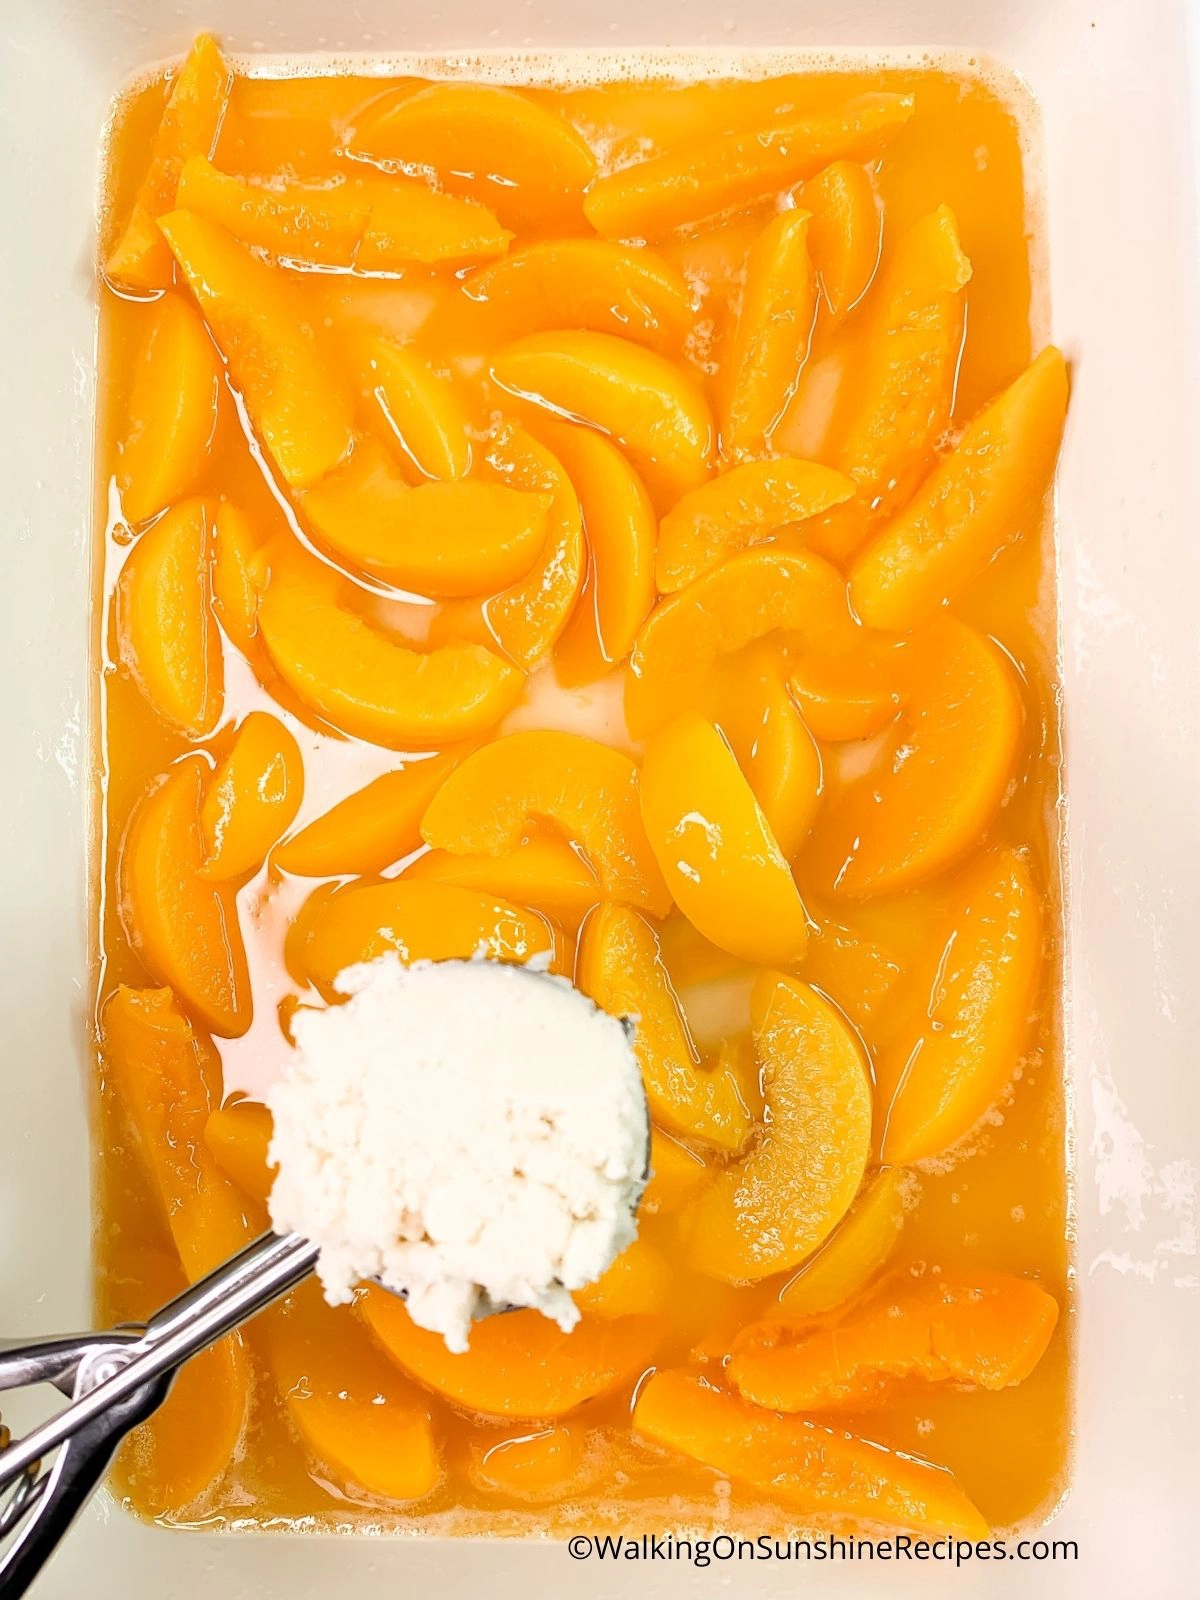 Use a cookie scoop to add white cake mix cobbler topping to canned peaches.